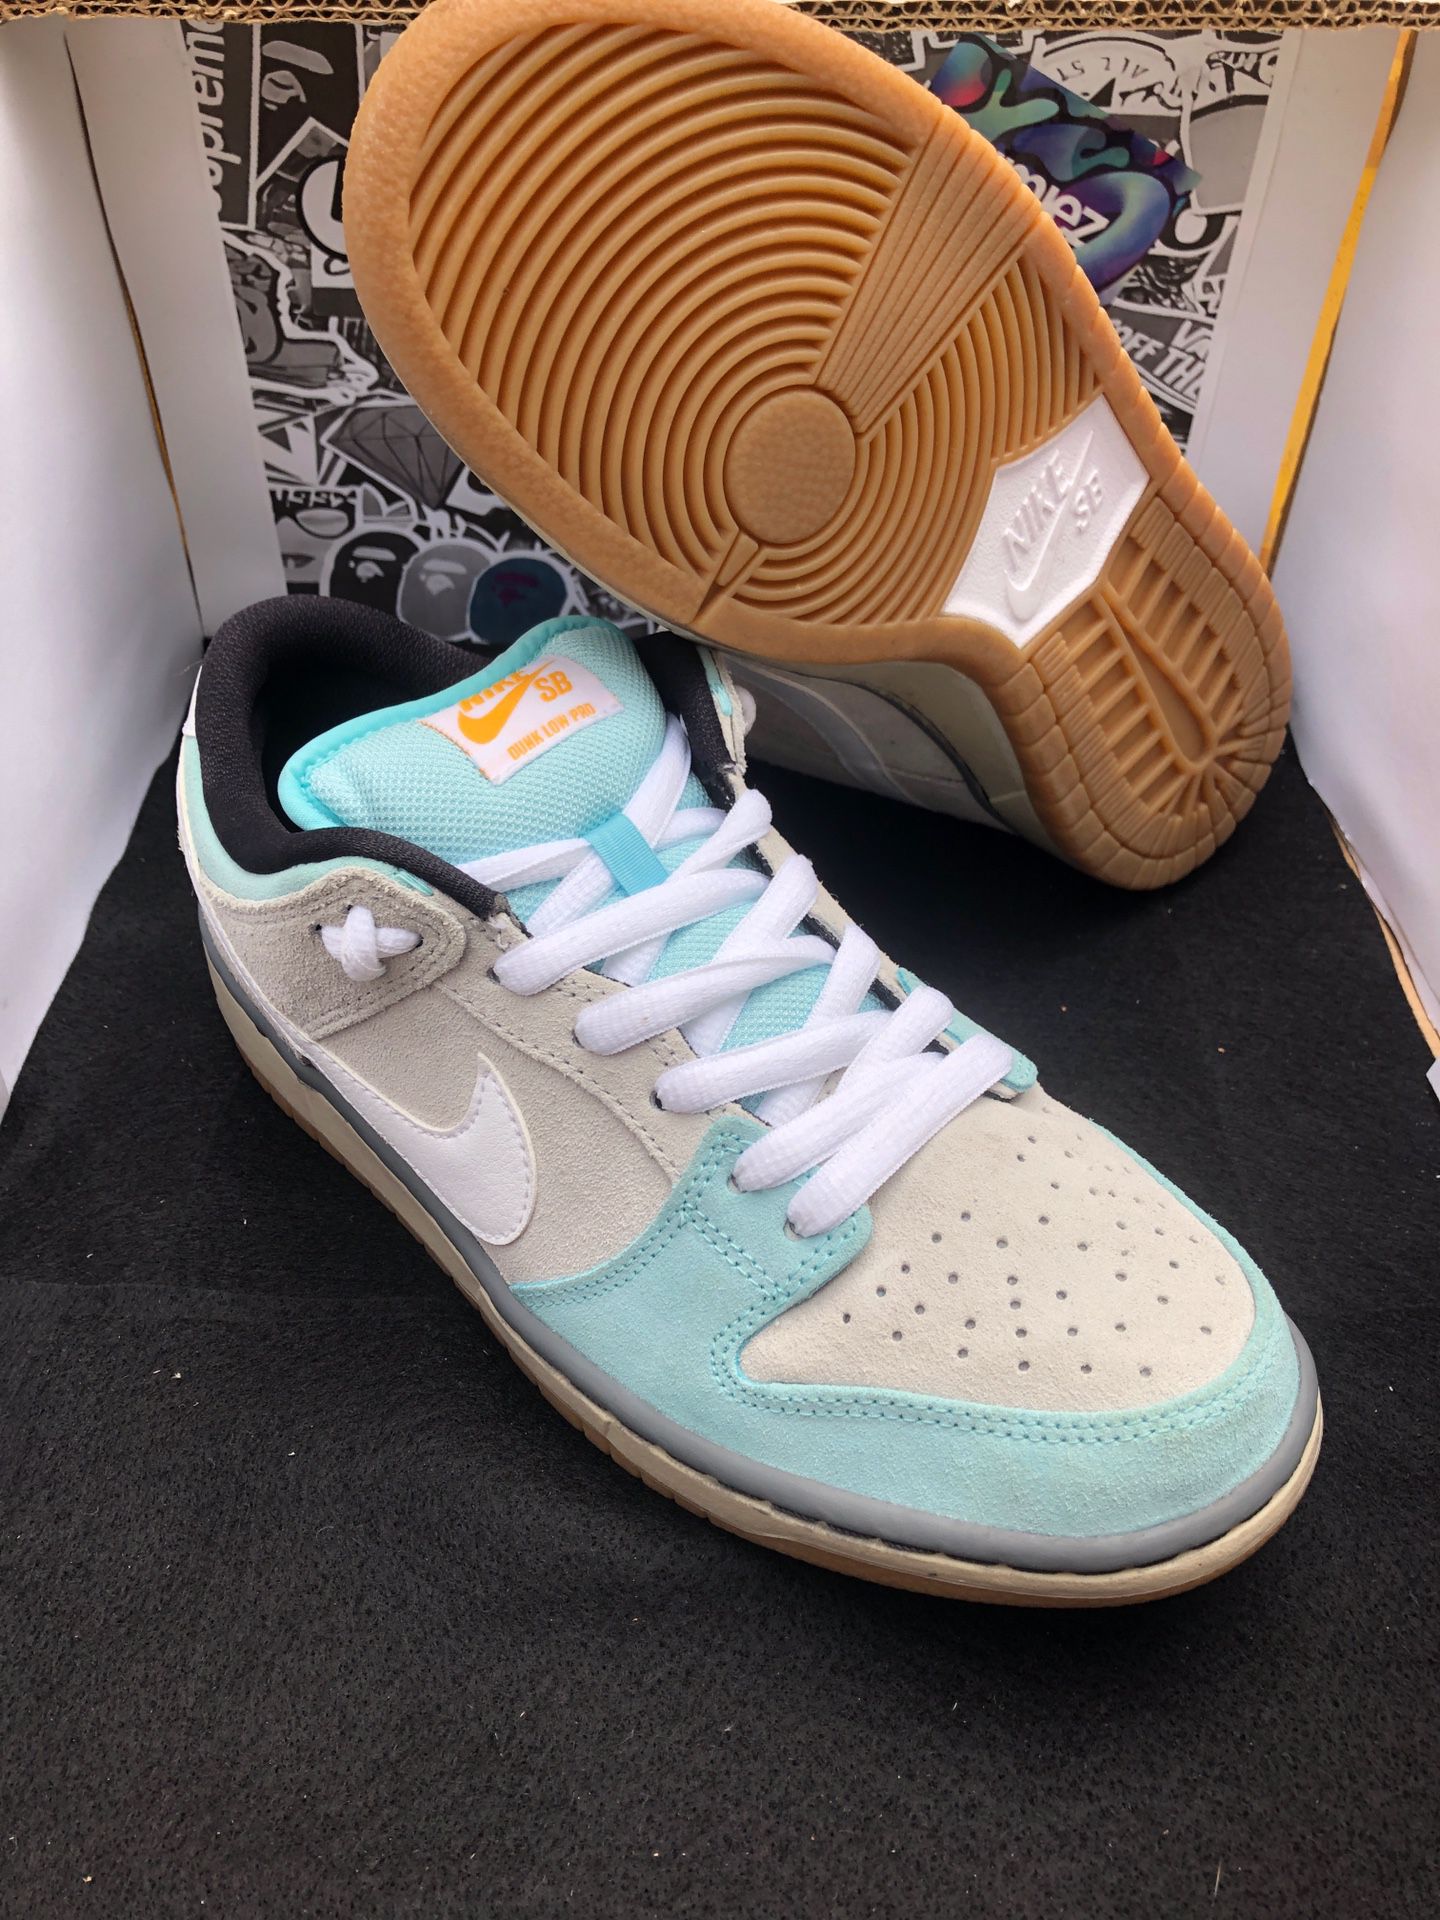 Ejecutable Partina City Retorcido Nike Sb dunk low pro Gulf of Mexico for Sale in Glendale, AZ - OfferUp